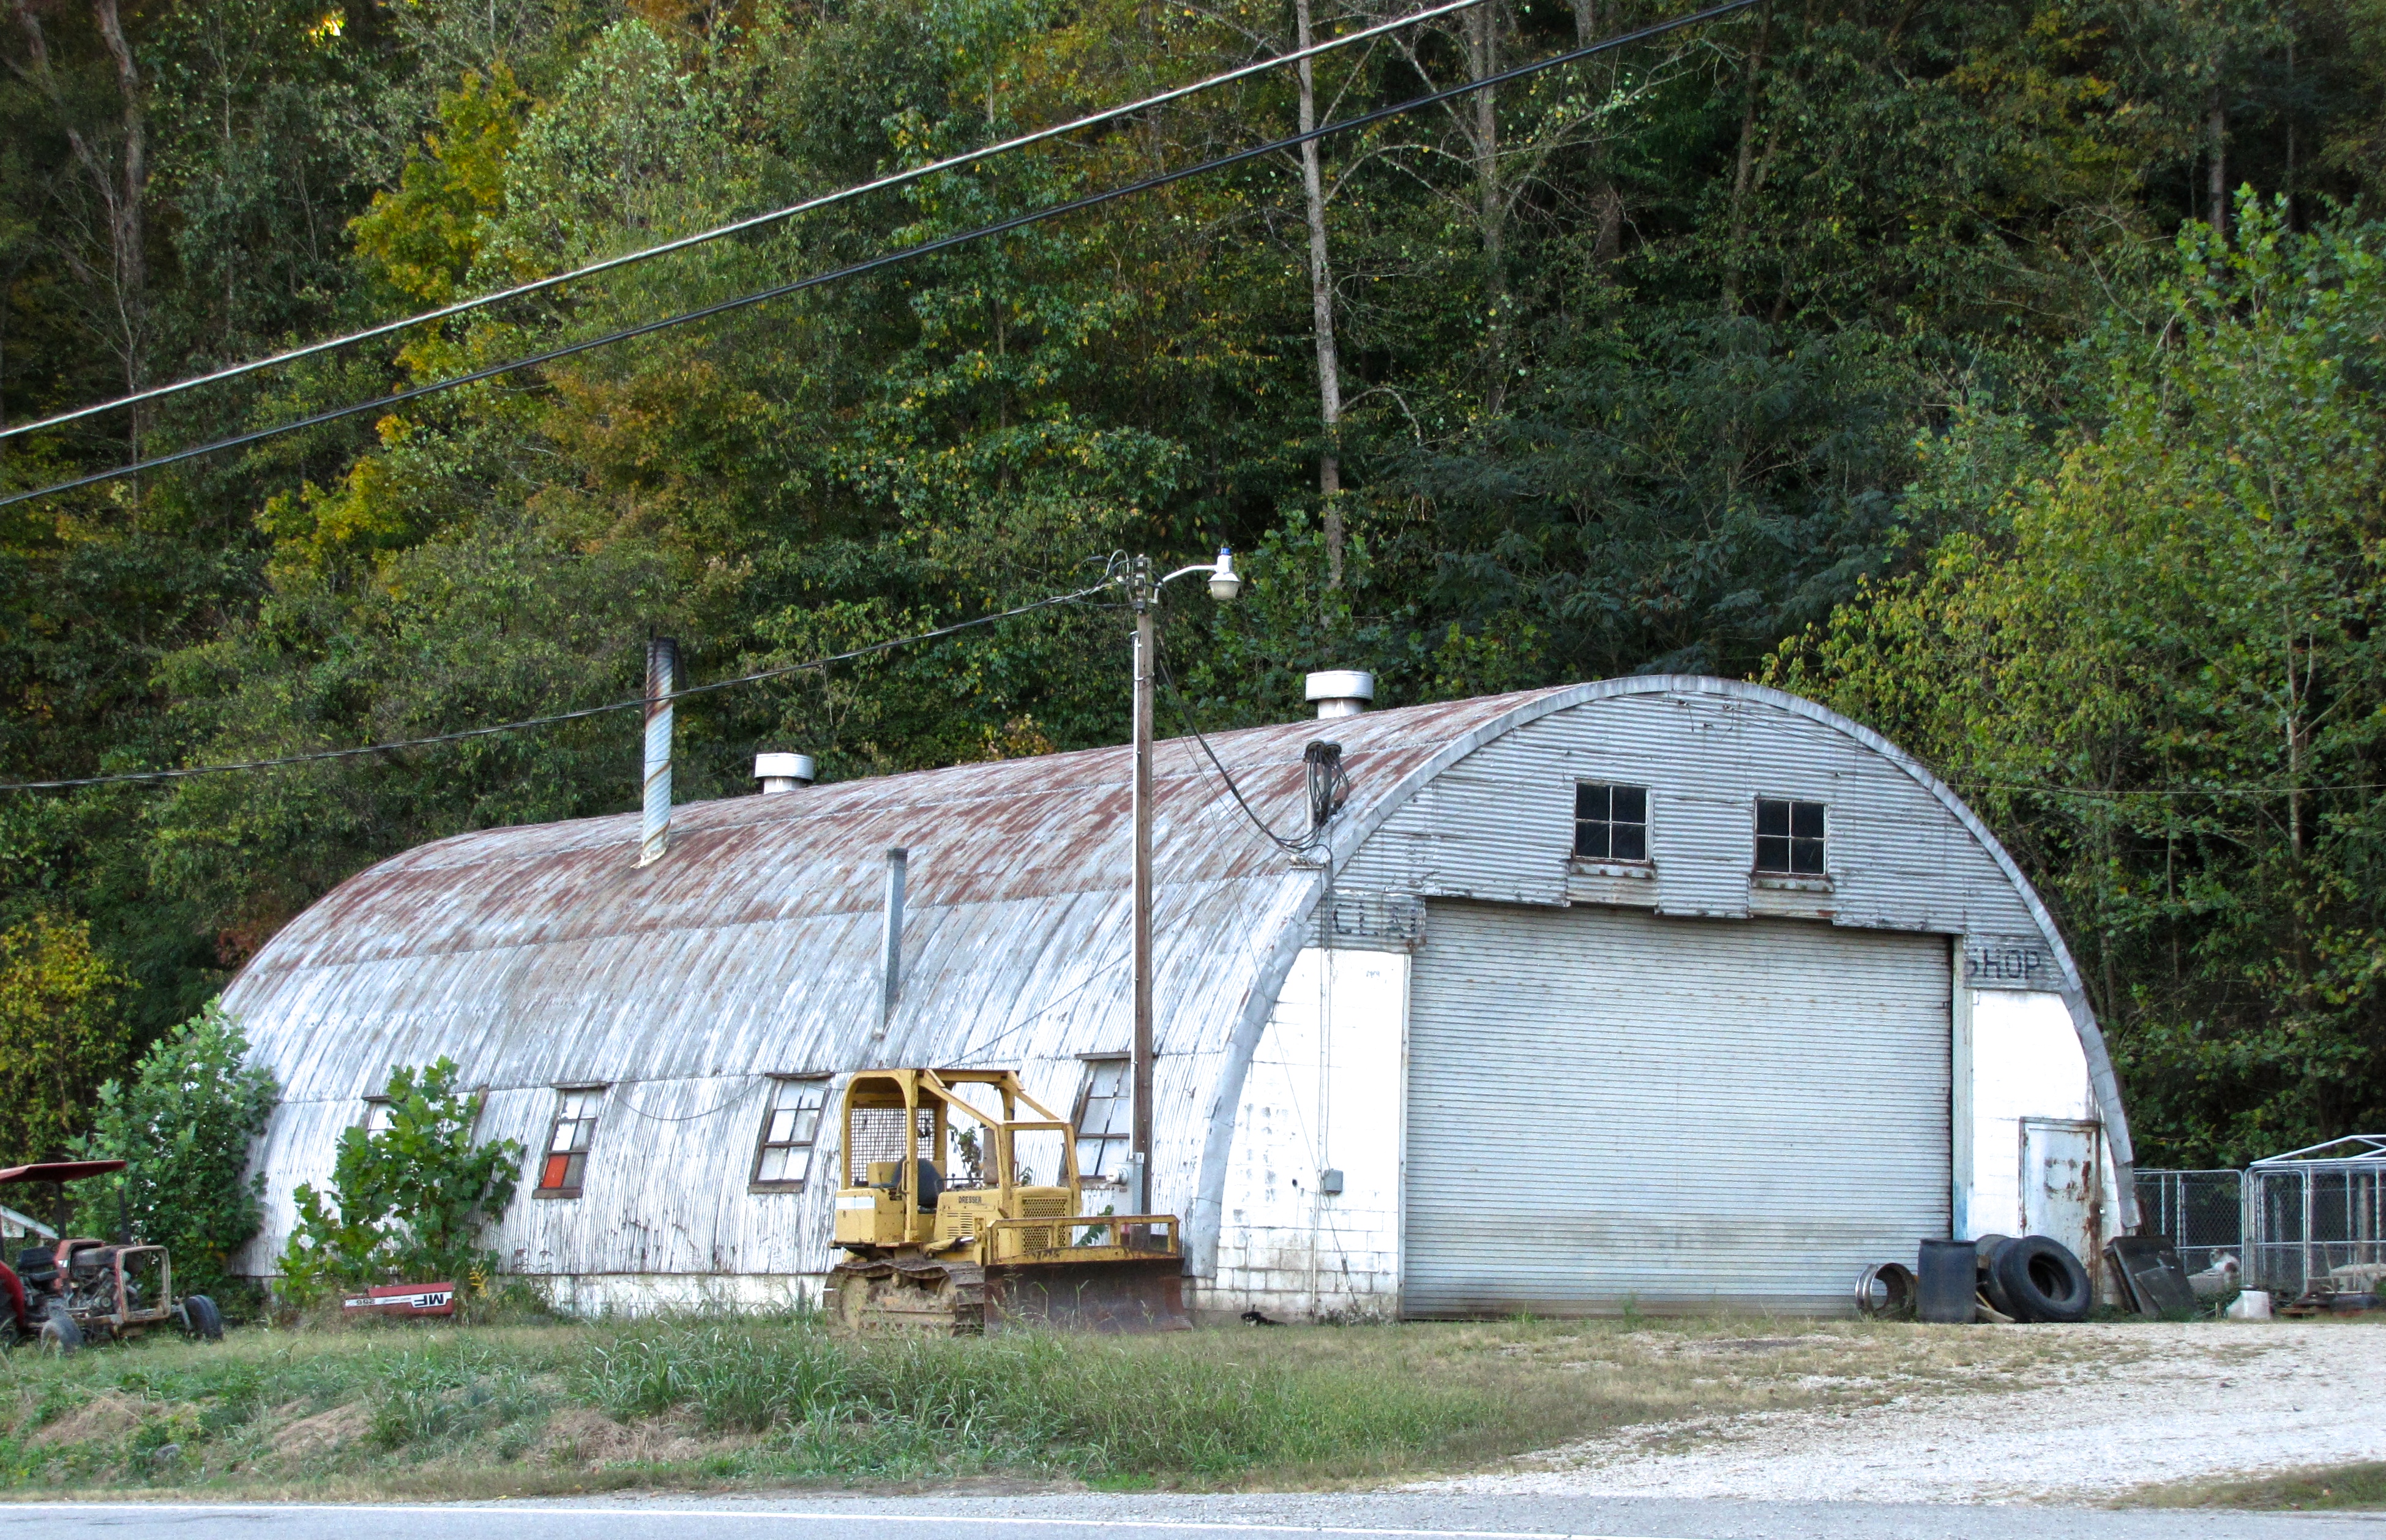 quonset hut in Mount Airy, MD